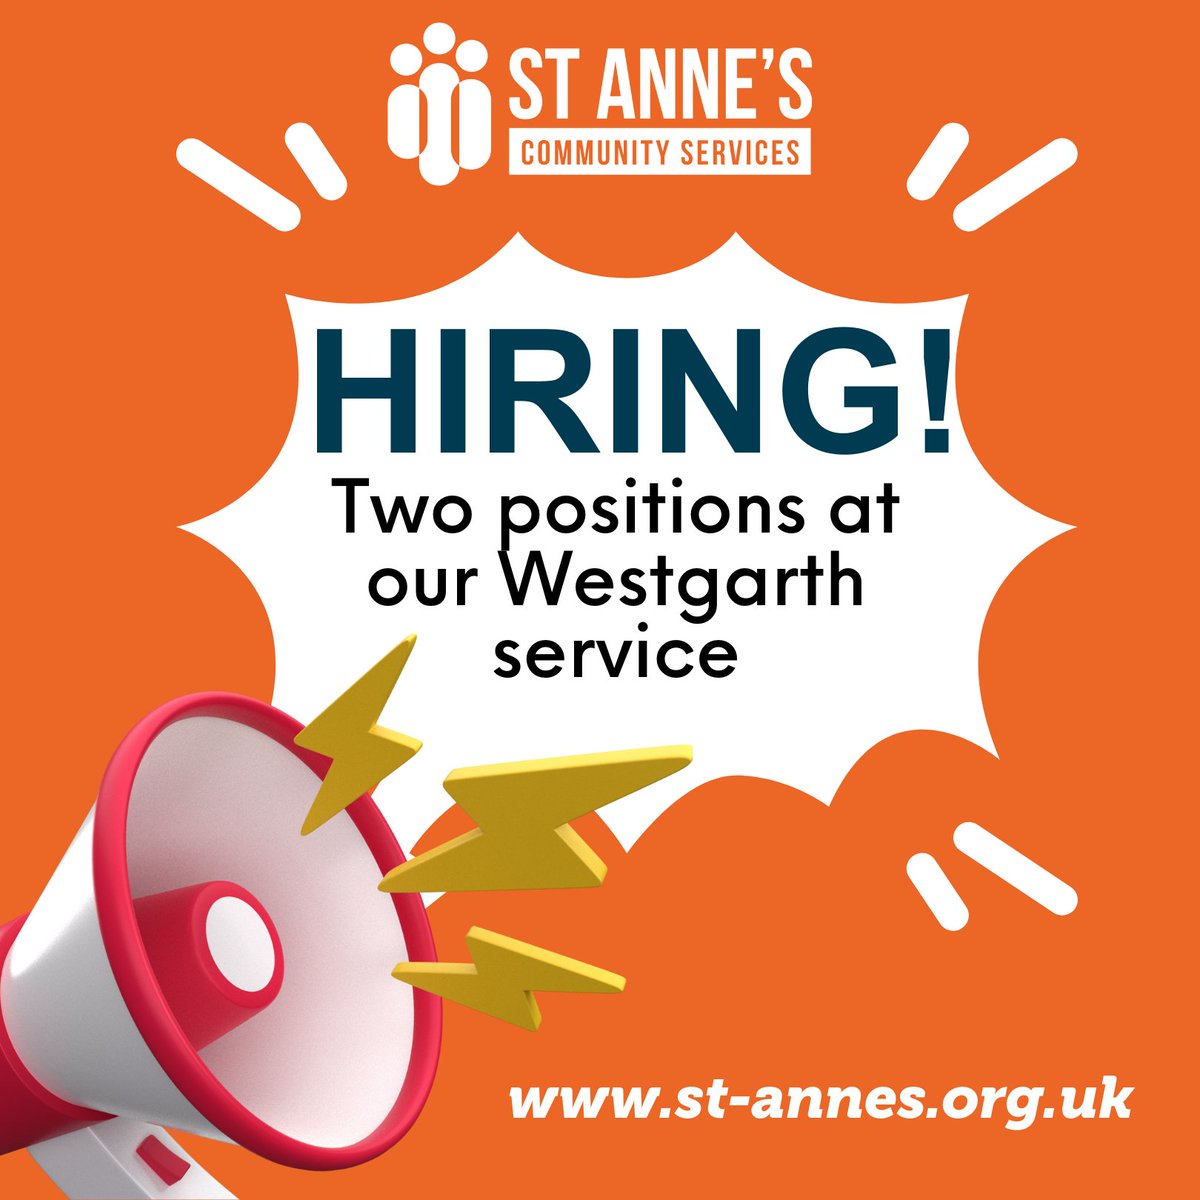 We are looking for two new colleagues to join our Westgarth Service. Westgarth is a warm and friendly service providing high quality respite support #Elland. Click here 👉 tinyurl.com/yu438b3u 👉 and tinyurl.com/yctdss3x #employment #team #job #yorkshire #charity #halifax